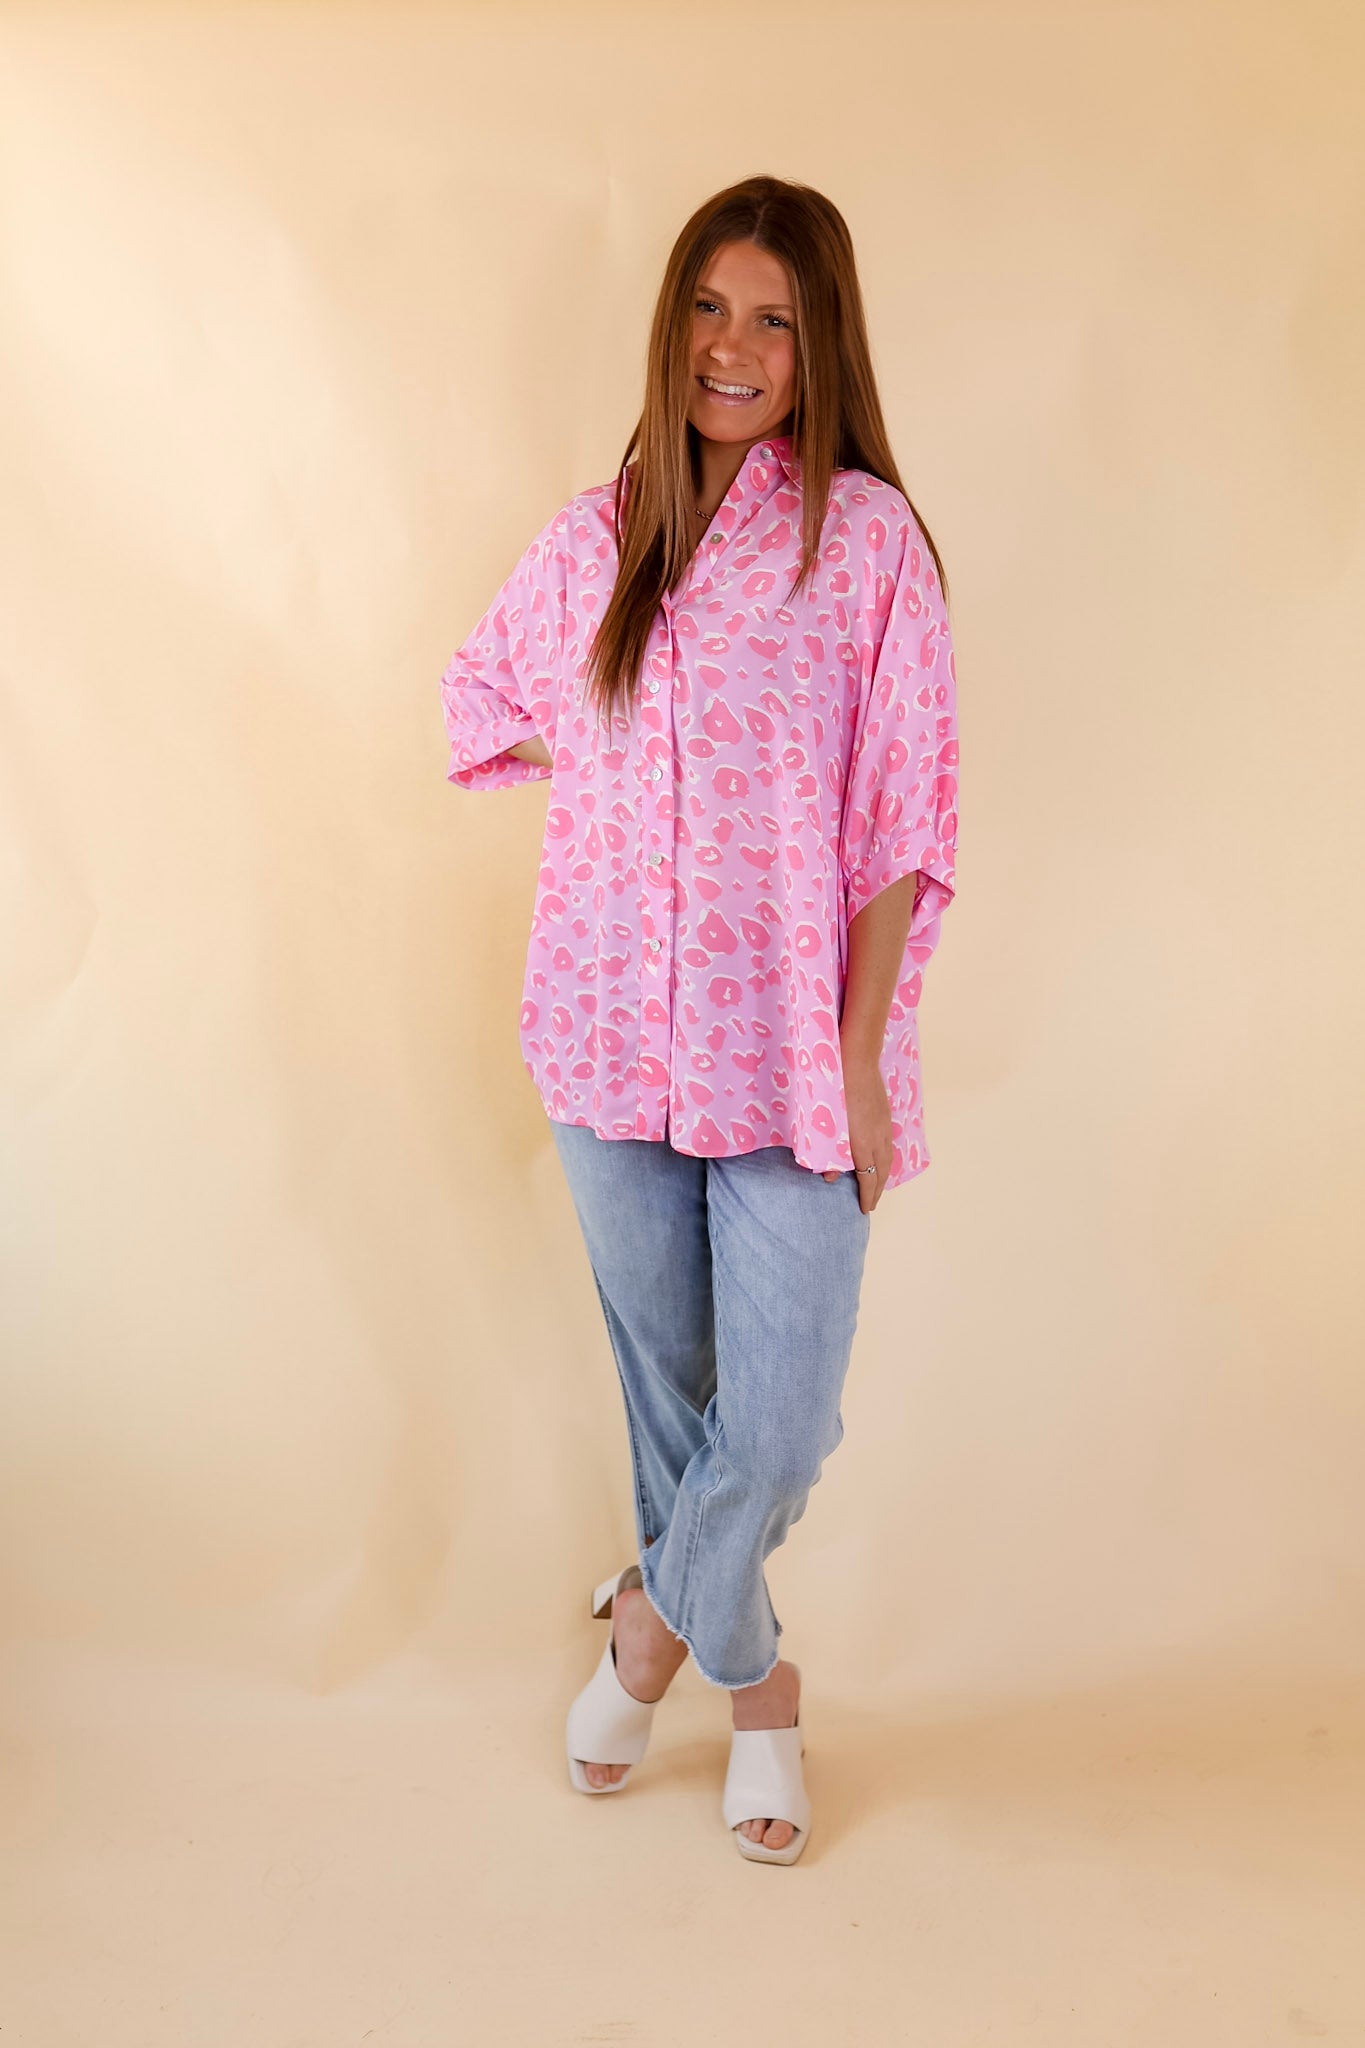 Sophisticated Sweetie Button Up Leopard Print Poncho Top in Pink - Giddy Up Glamour Boutique